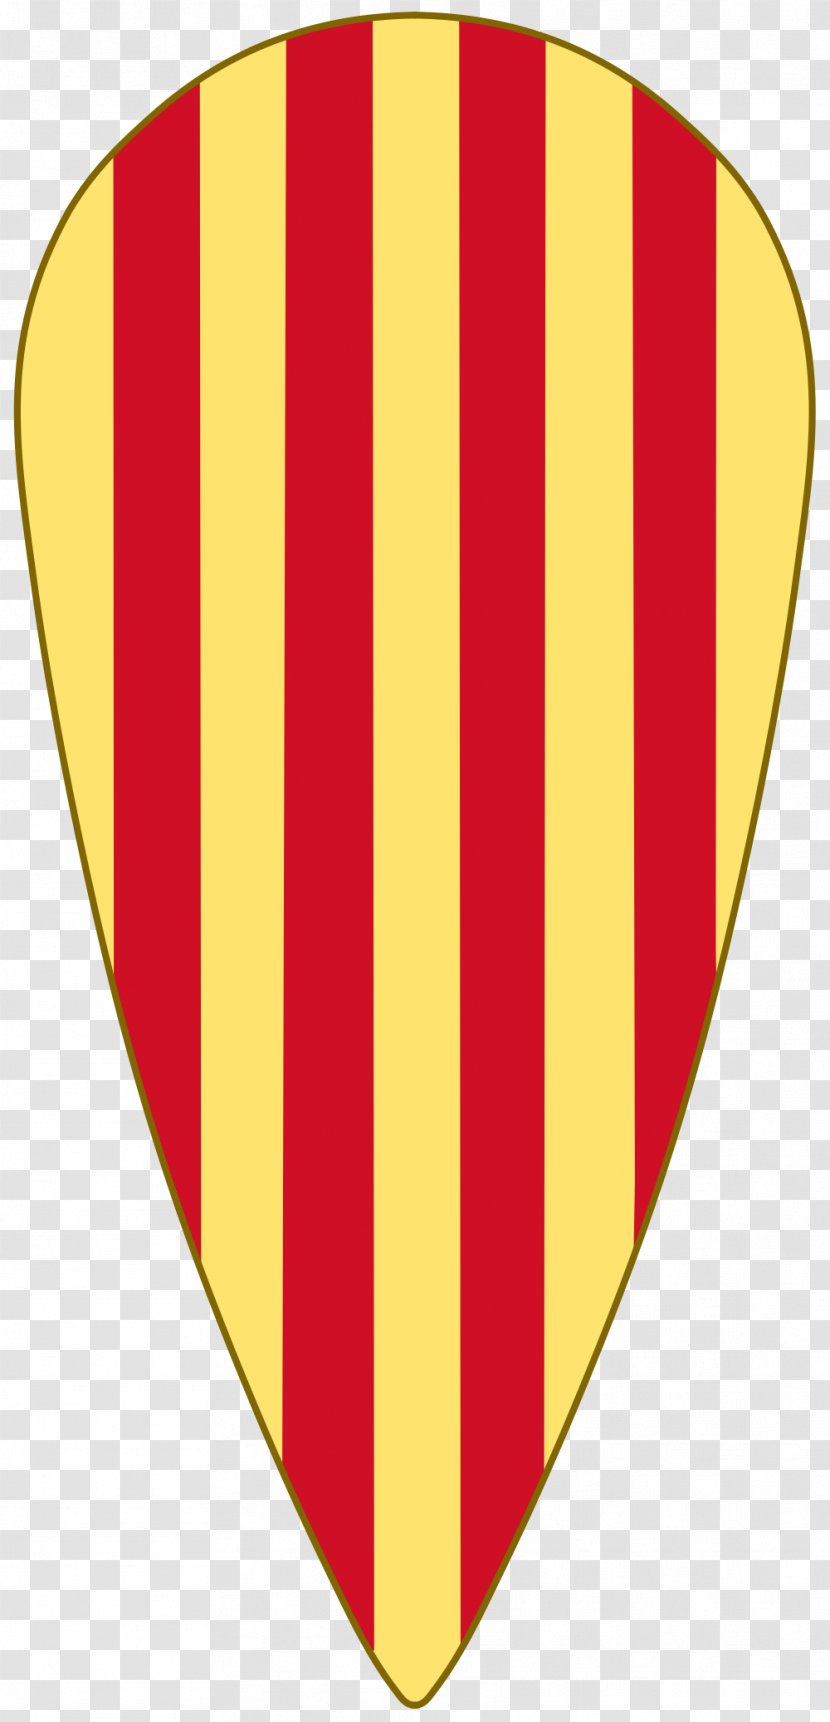 County Of Barcelona Crown Aragon Kingdom Coat Arms - Ramon Berenguer Iv Count - Shield Transparent PNG